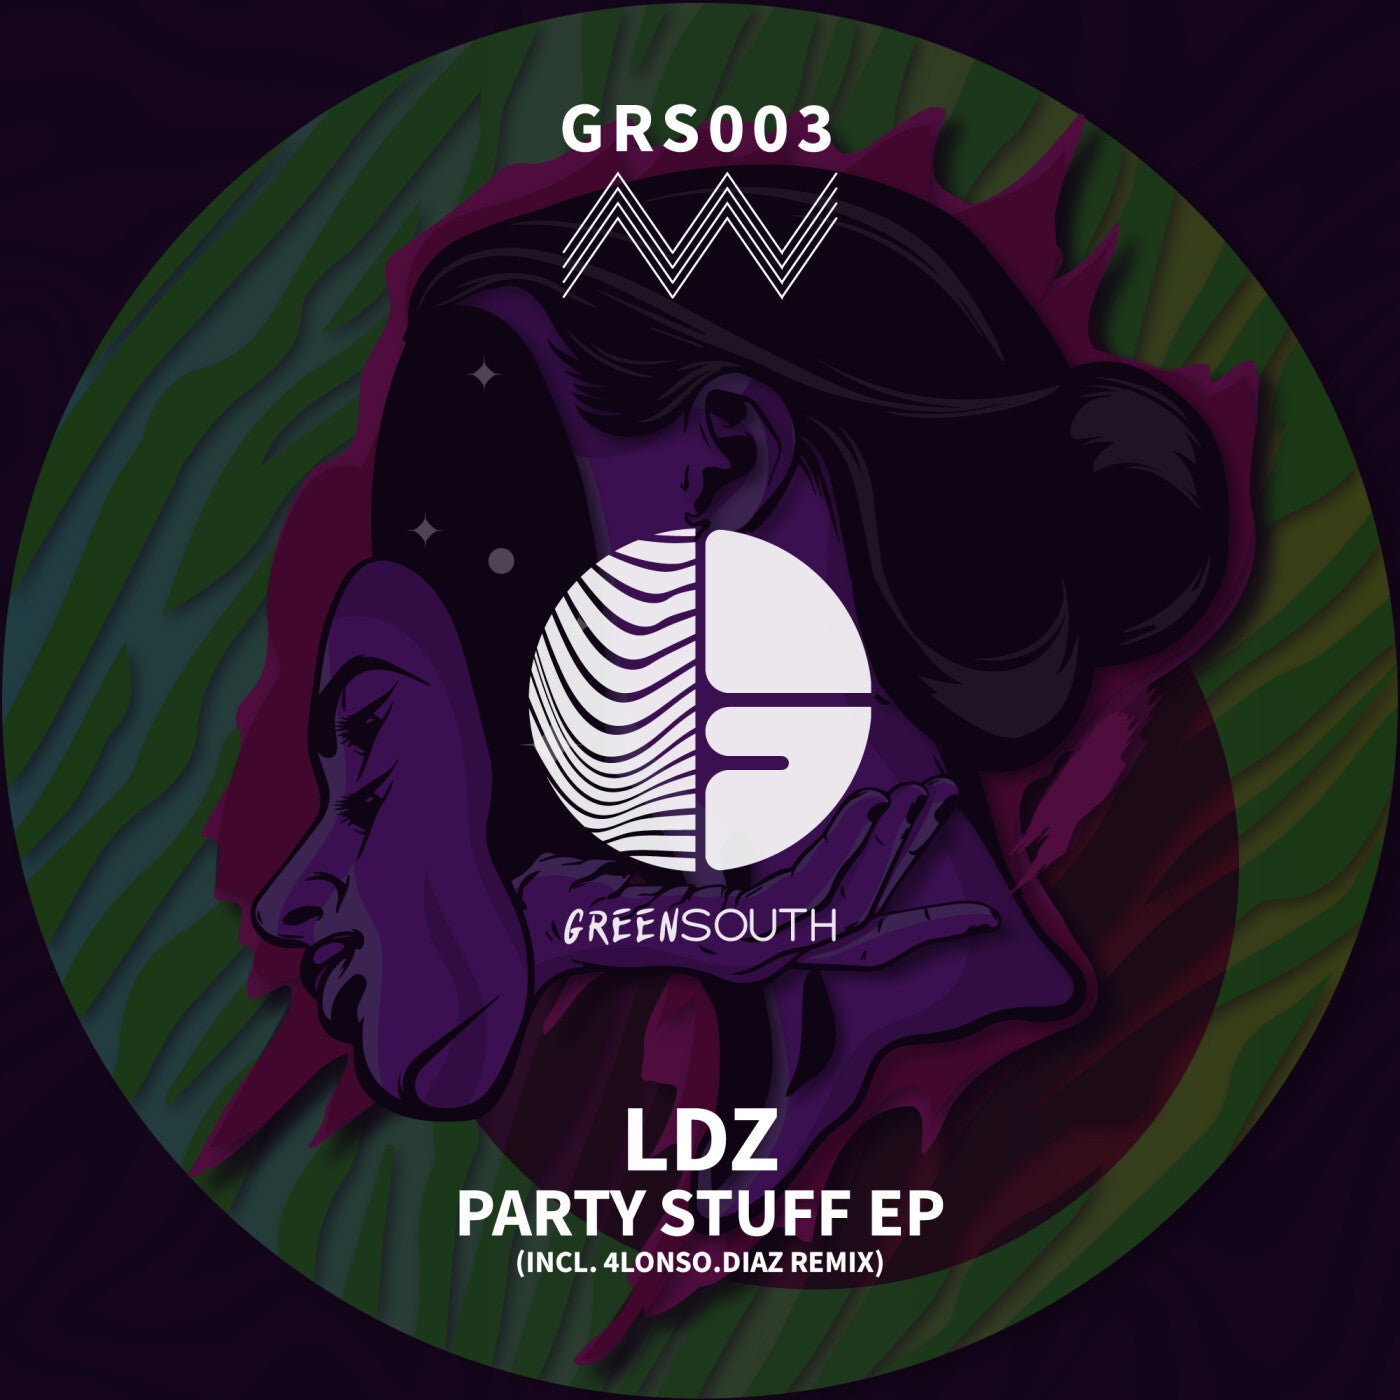 Party Stuff EP